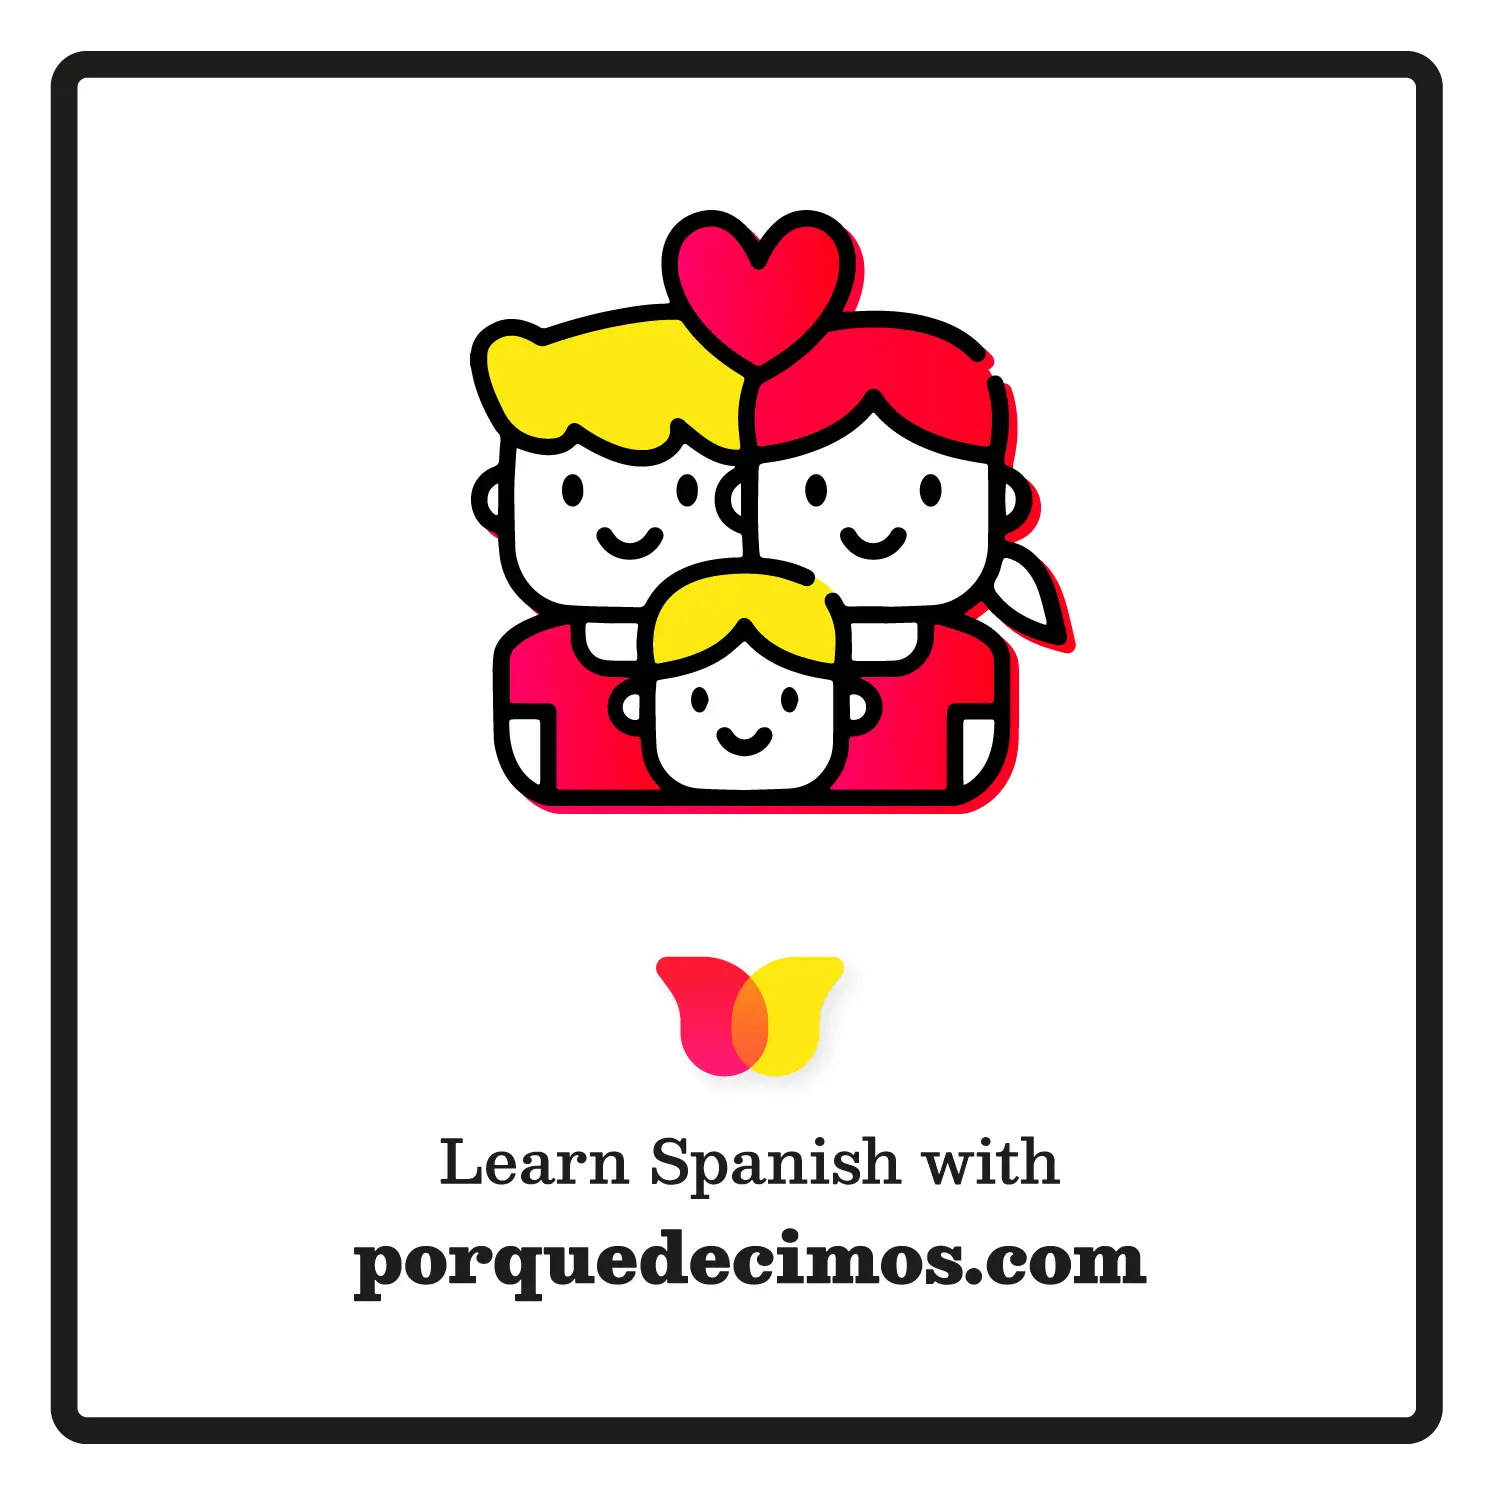 Learn to speak Spanish with us